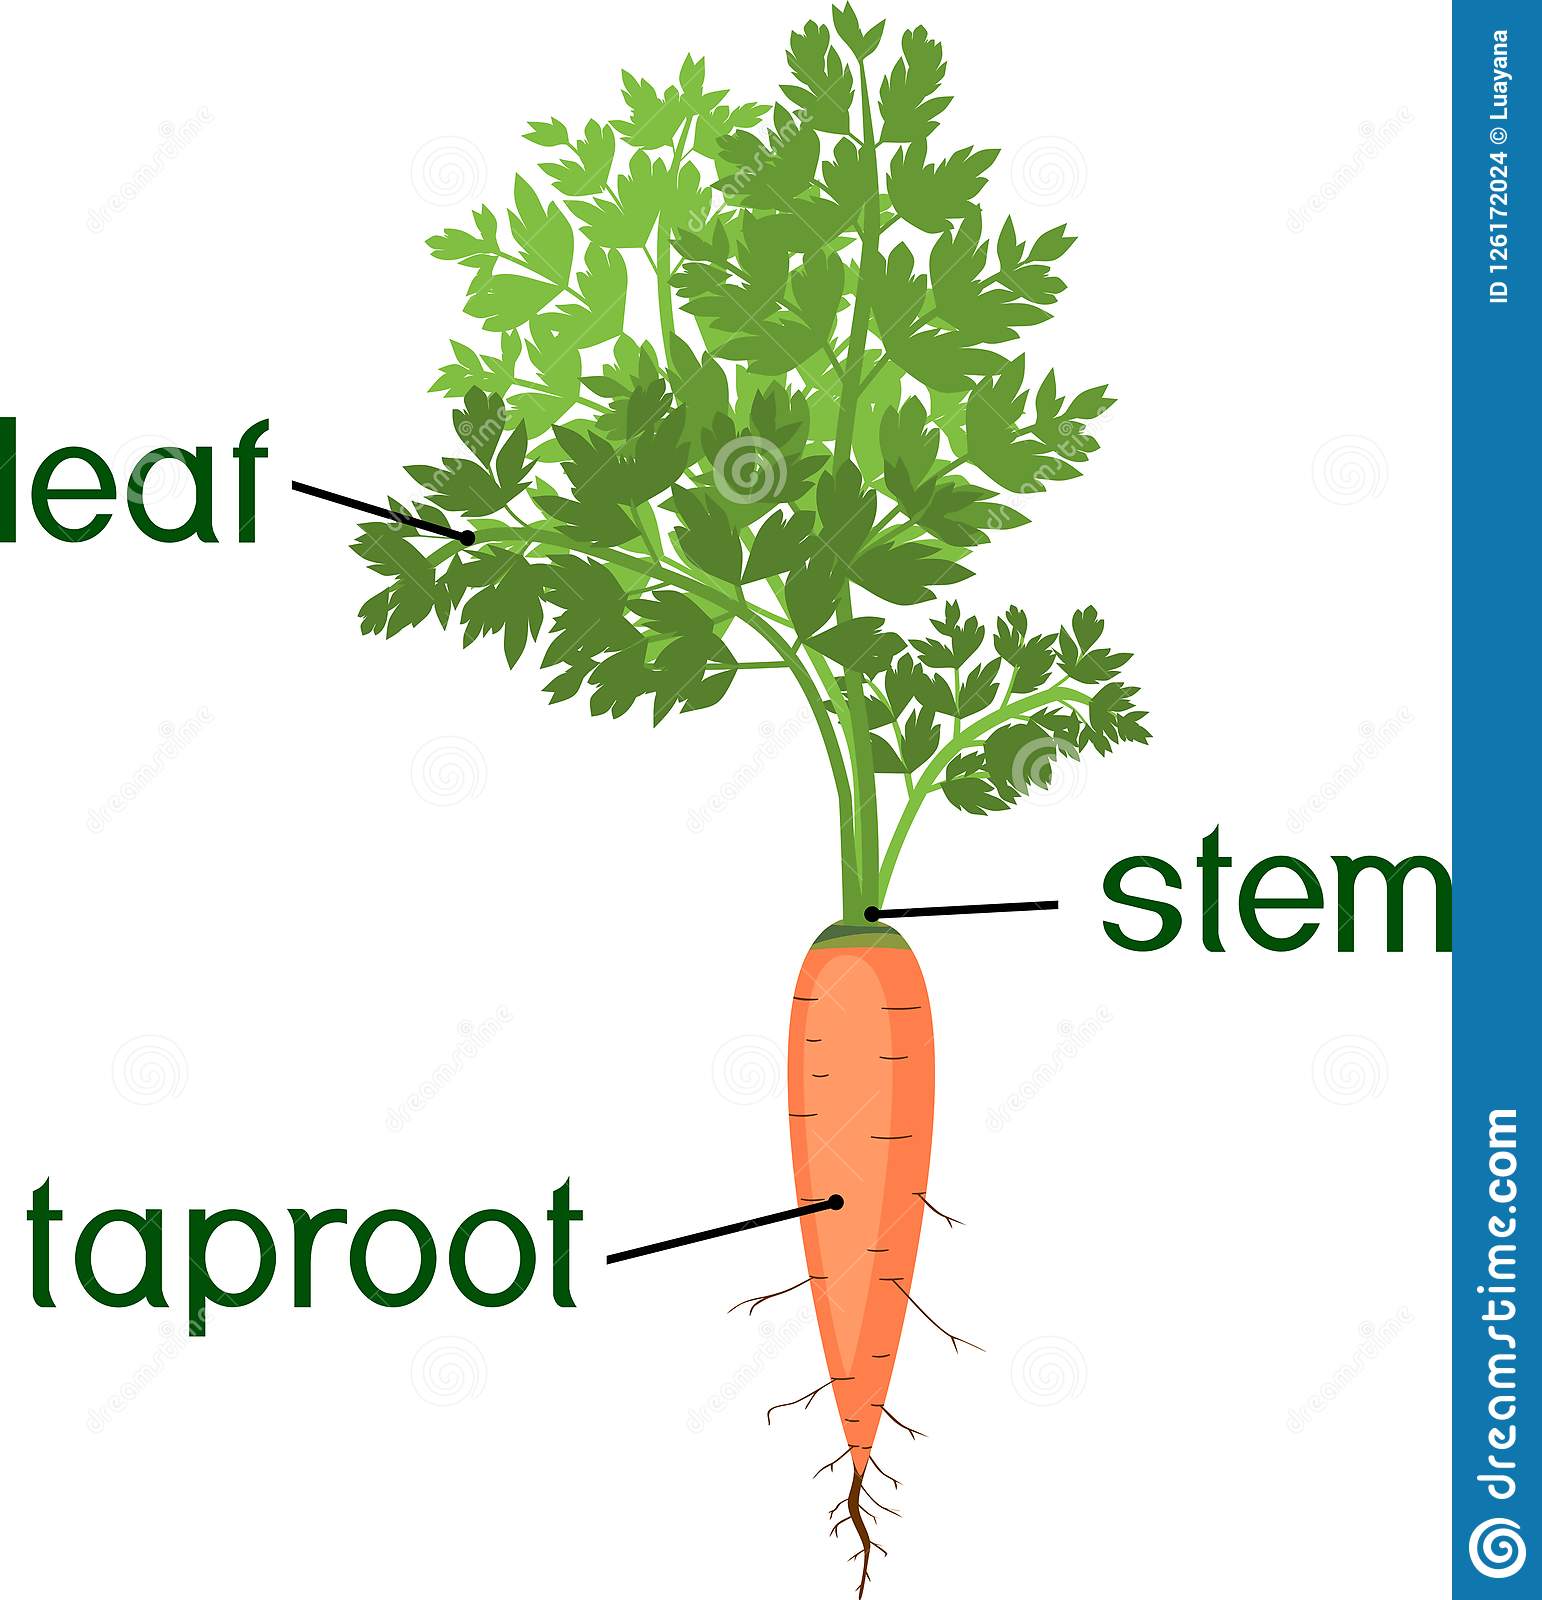 taproot plant, example of taproot plant, carrot taproot plant